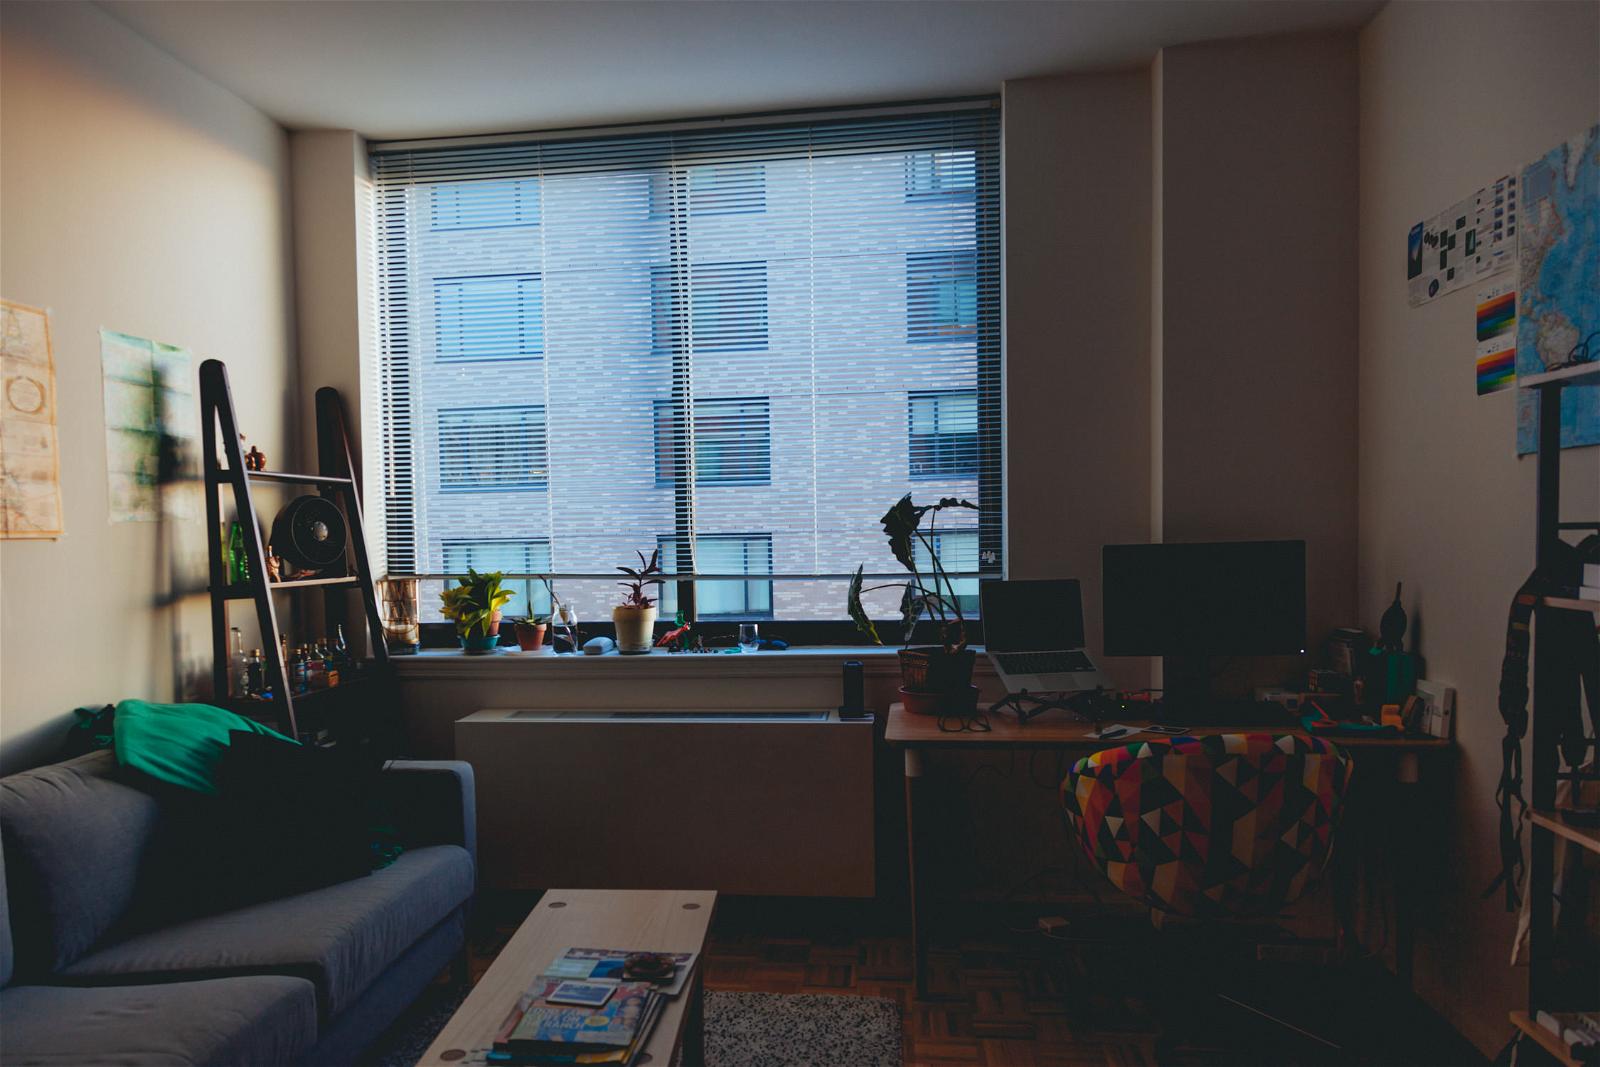 How to move into your first apartment as a couple (23 tips)